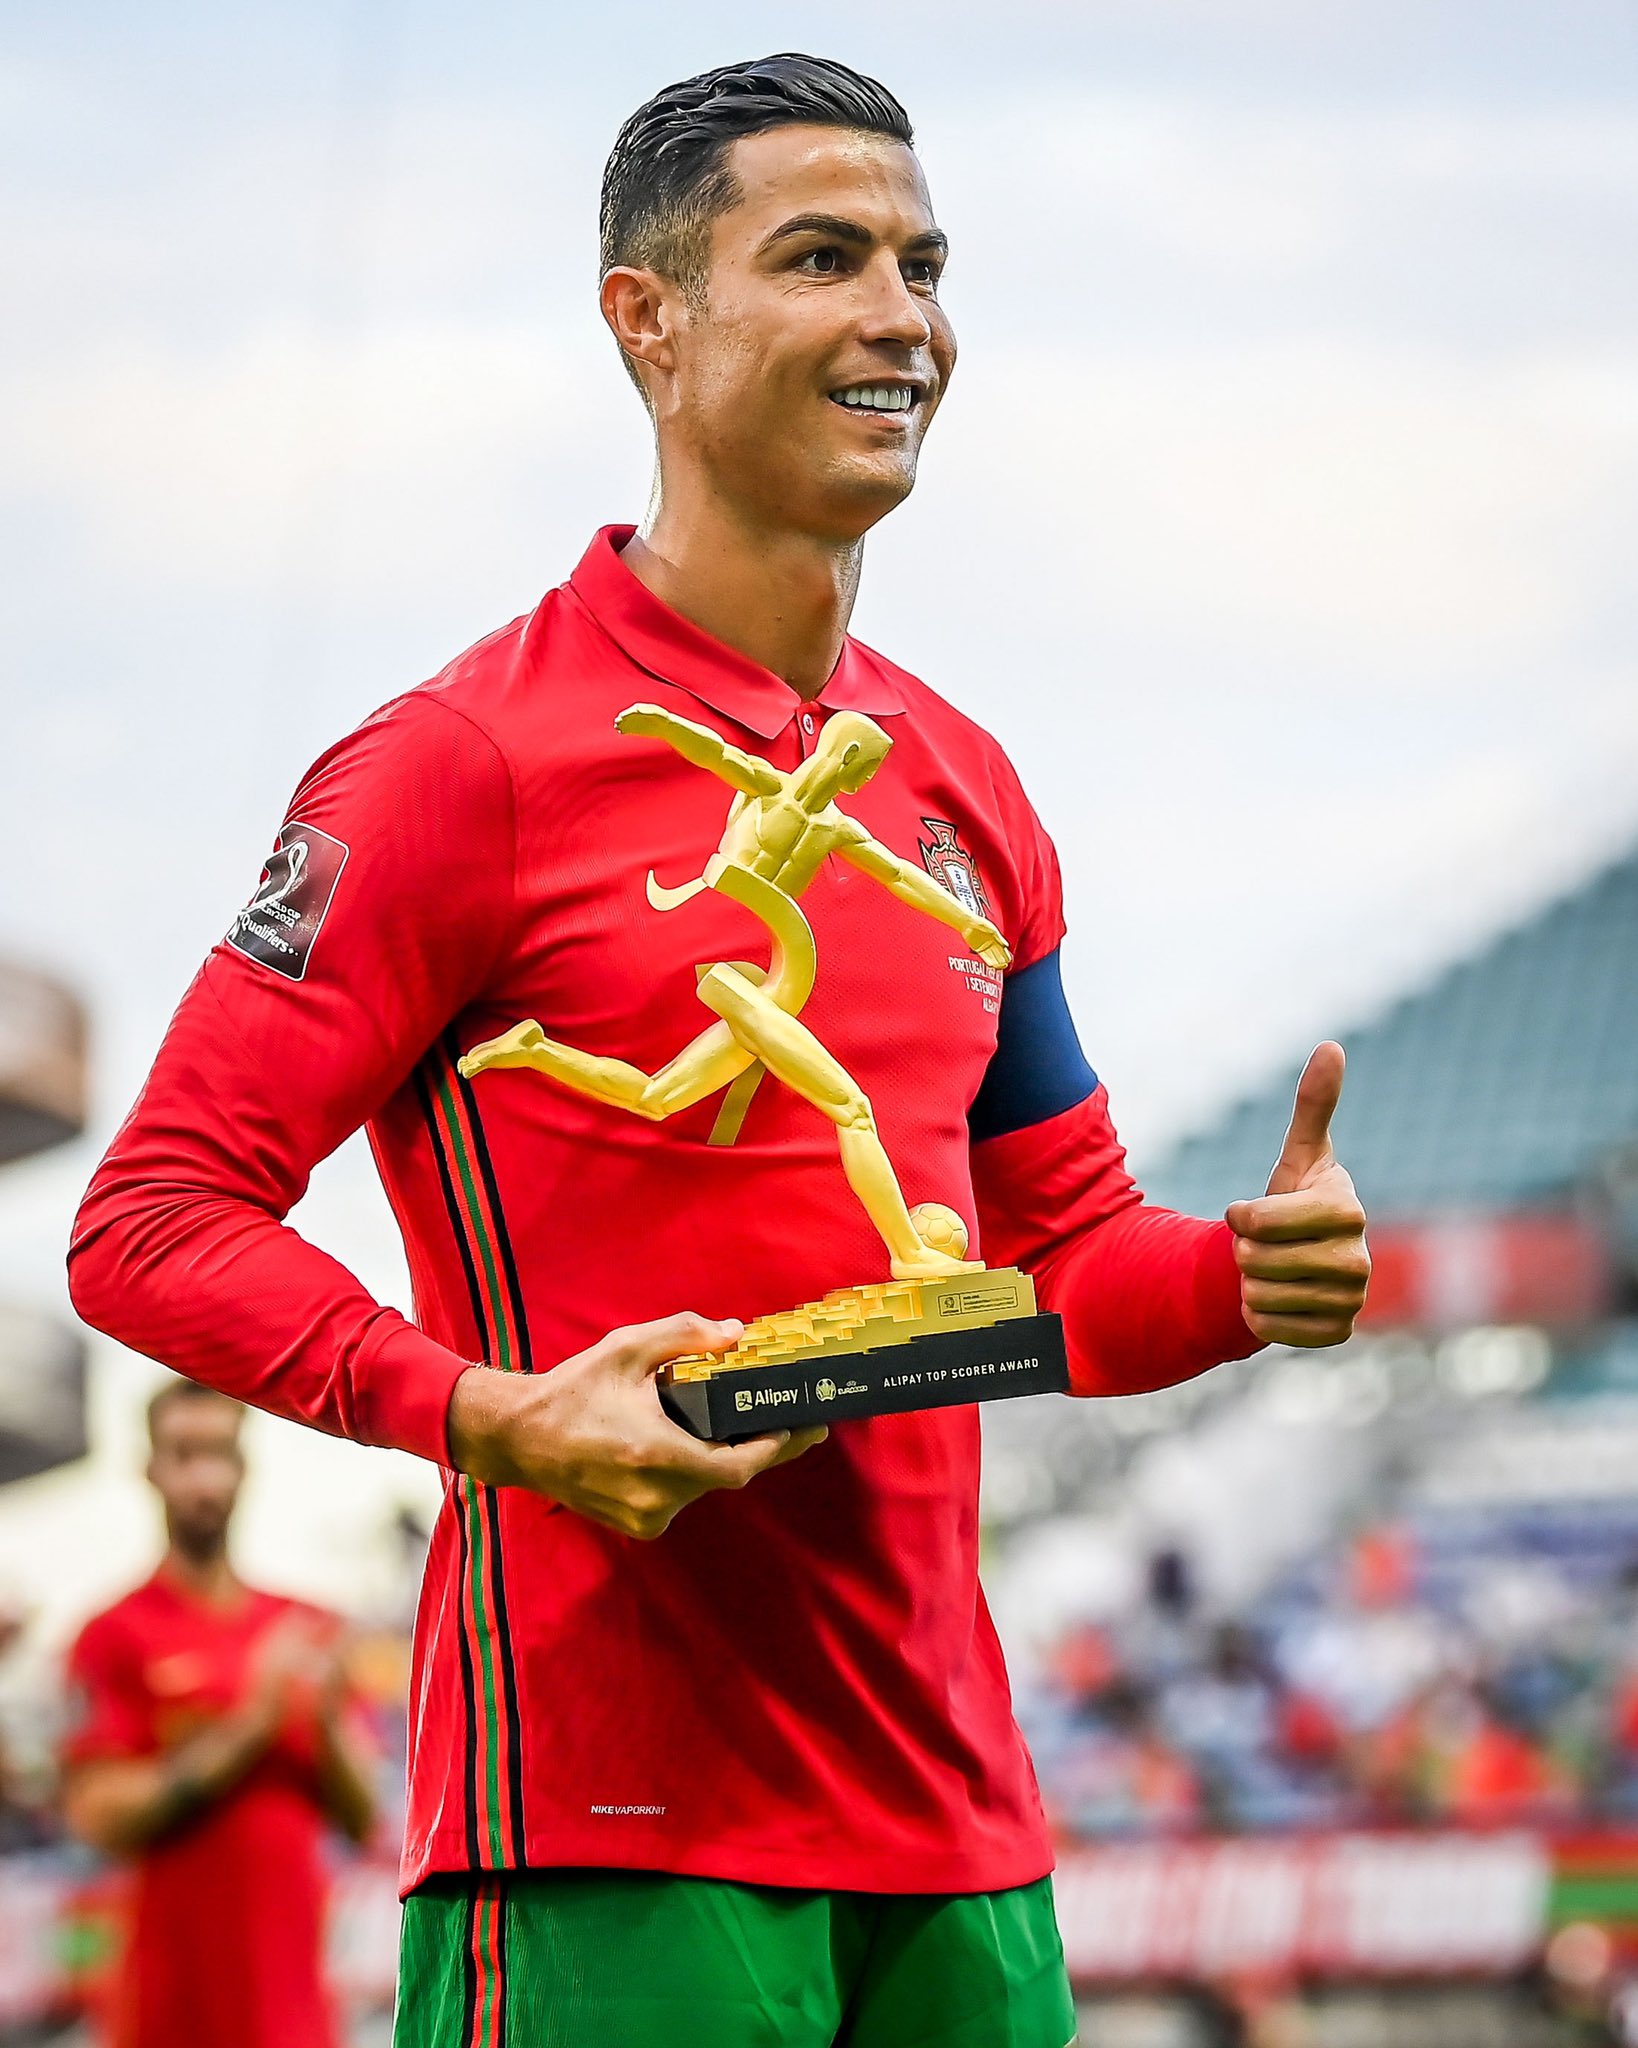 Madridista Haven on Twitter: "Ronaldo's 2021 Serie A Top Scorer Serie A Forward of the Year Top for Juventus Euro 2021 Top Scorer Euro Top Scorer of all time Top Scorer